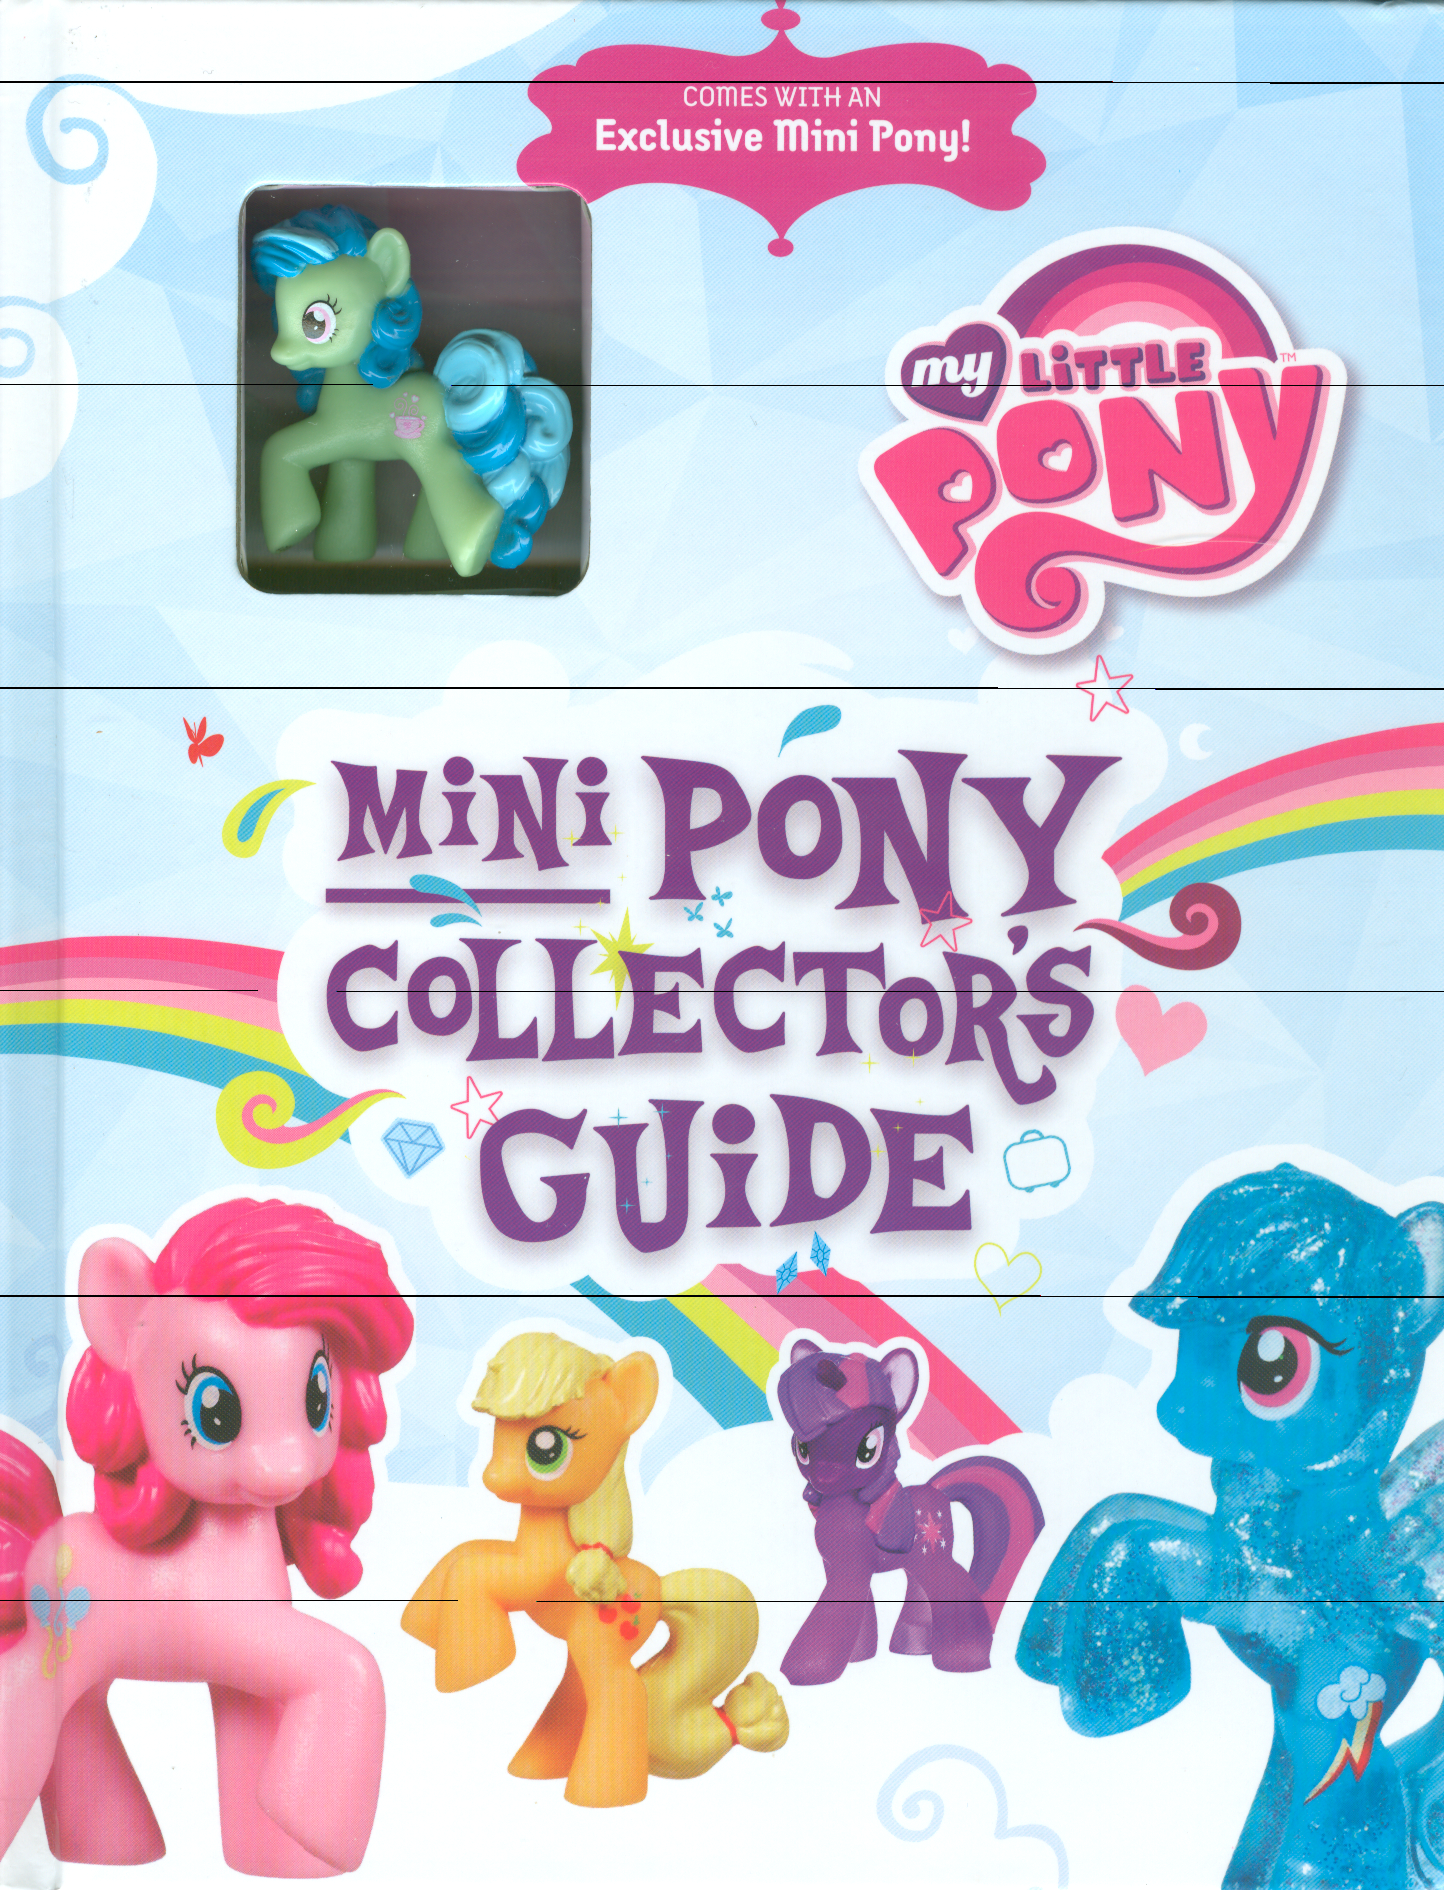 My little Pony Collector's Guide Blindbag g4